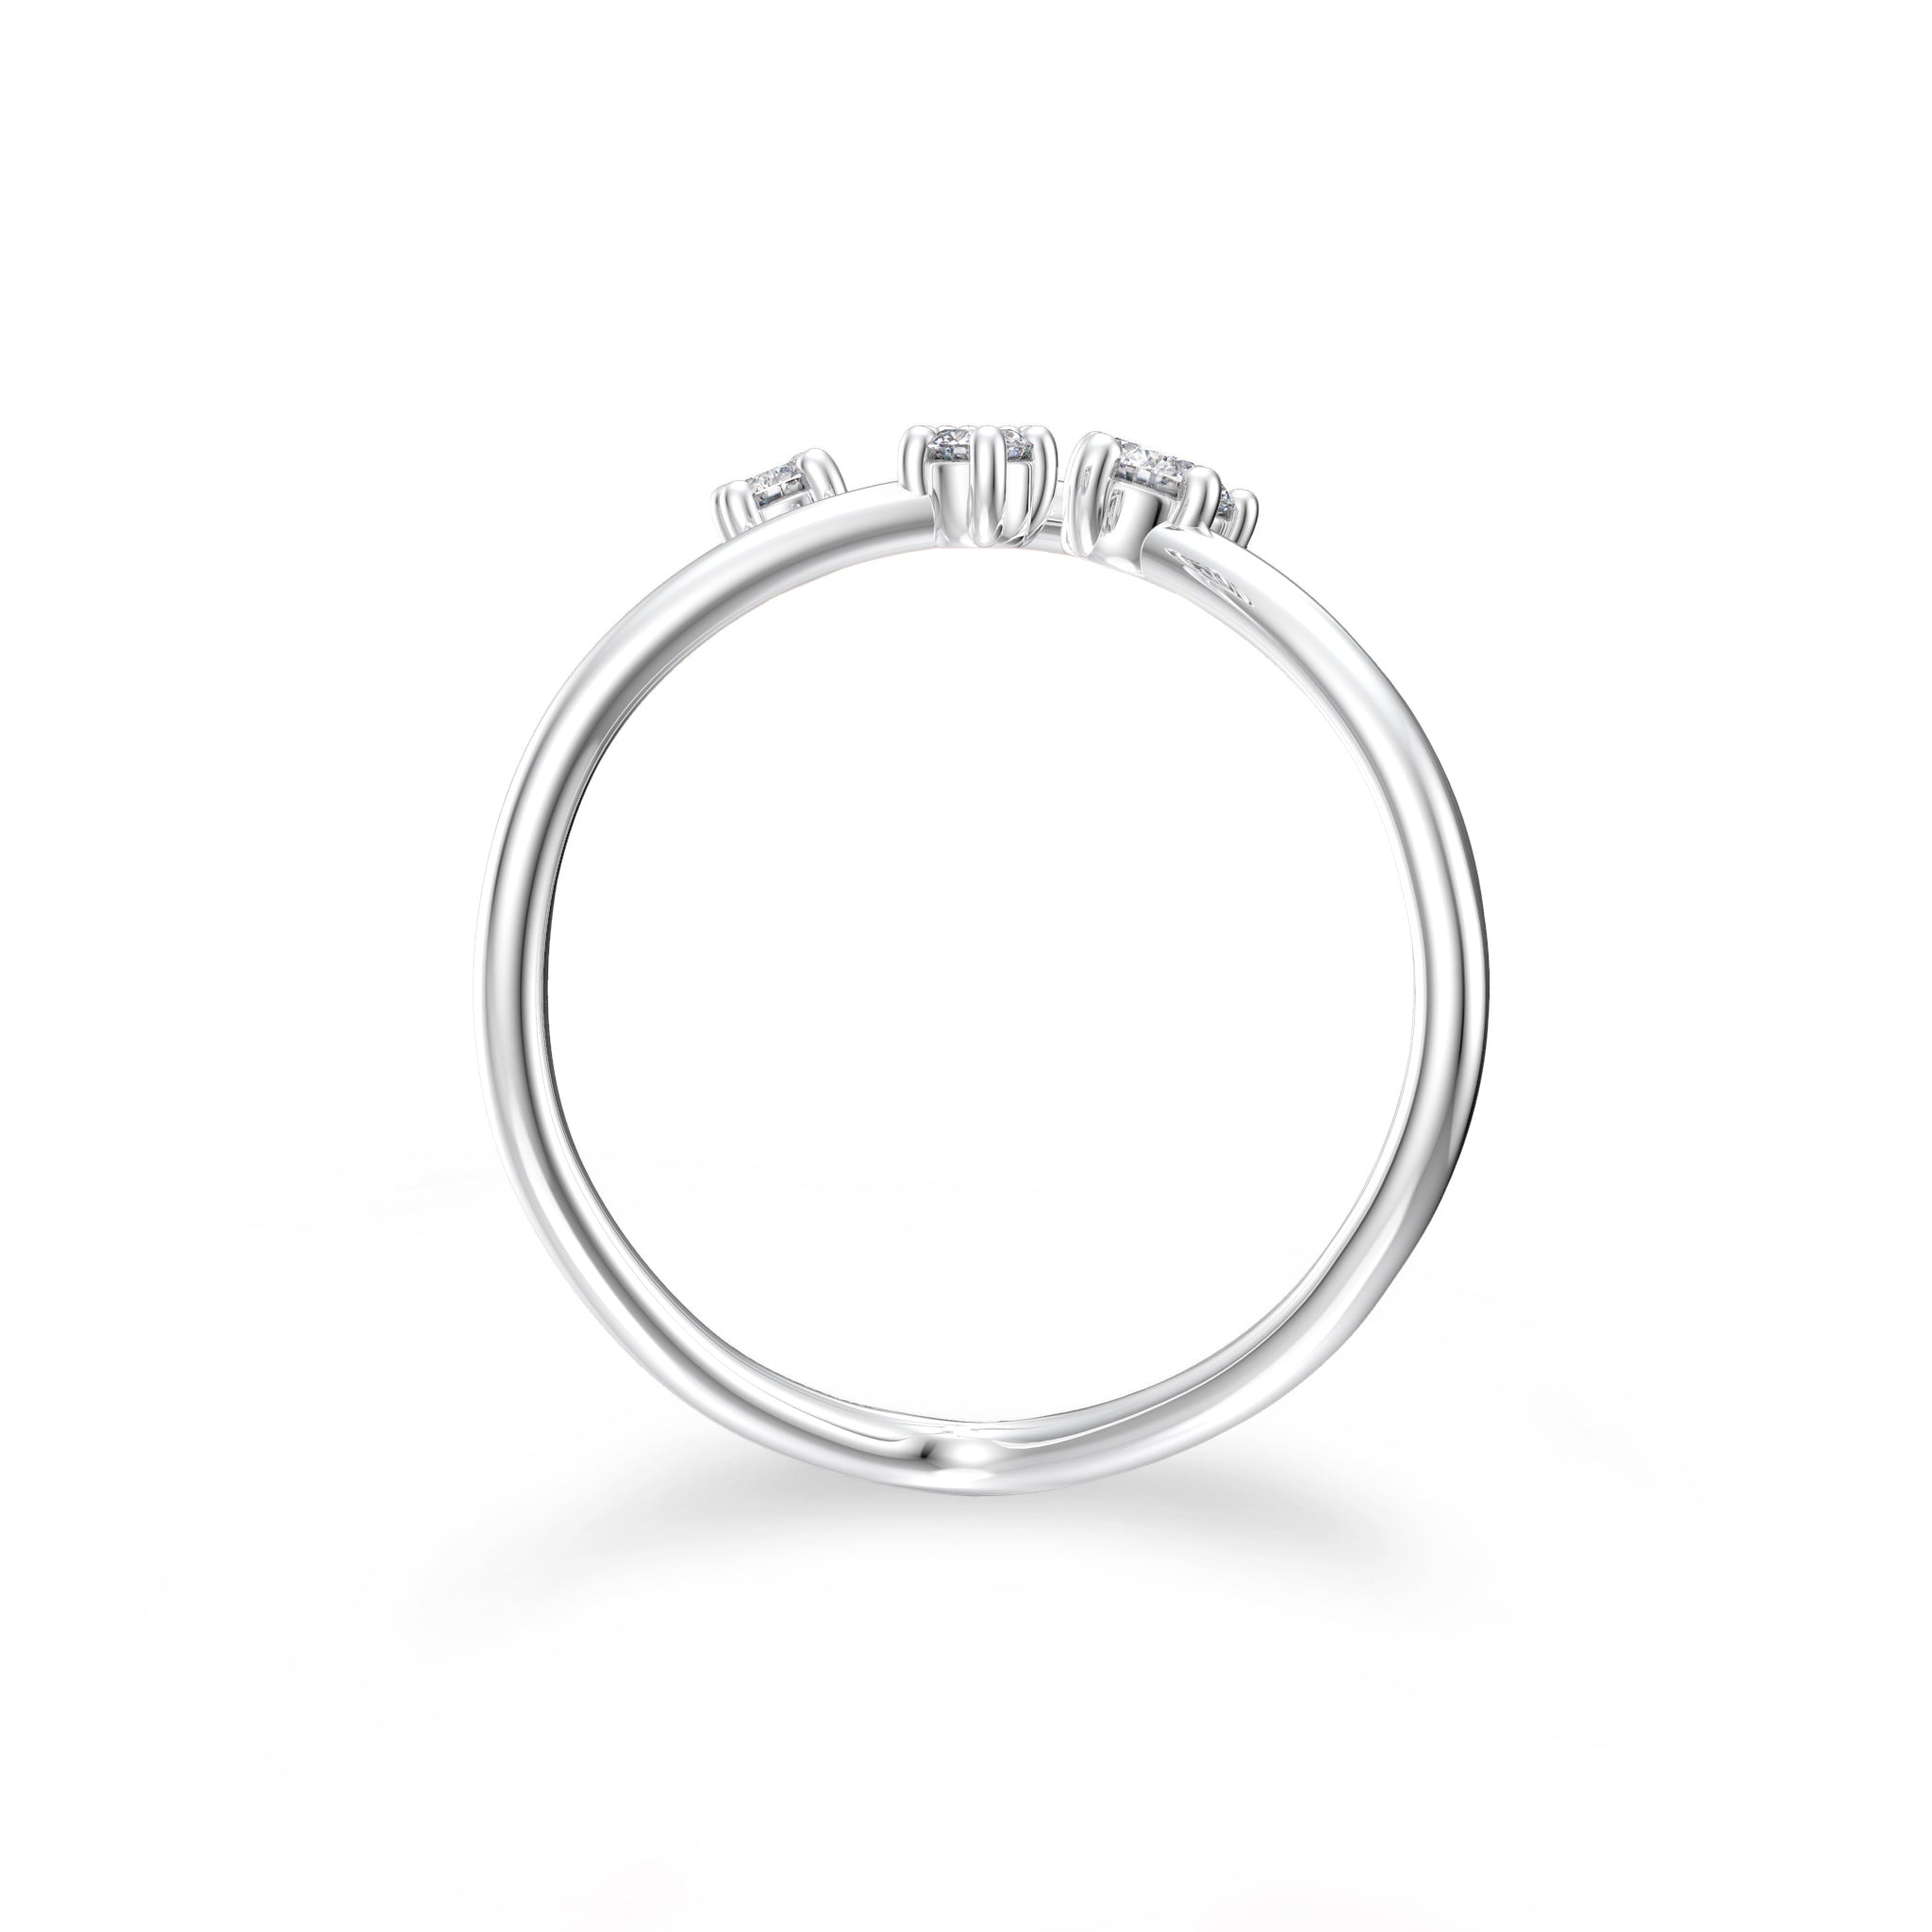 Shimansky - Southern Cross Small Diamond Ring Crafted in 14K White Gold